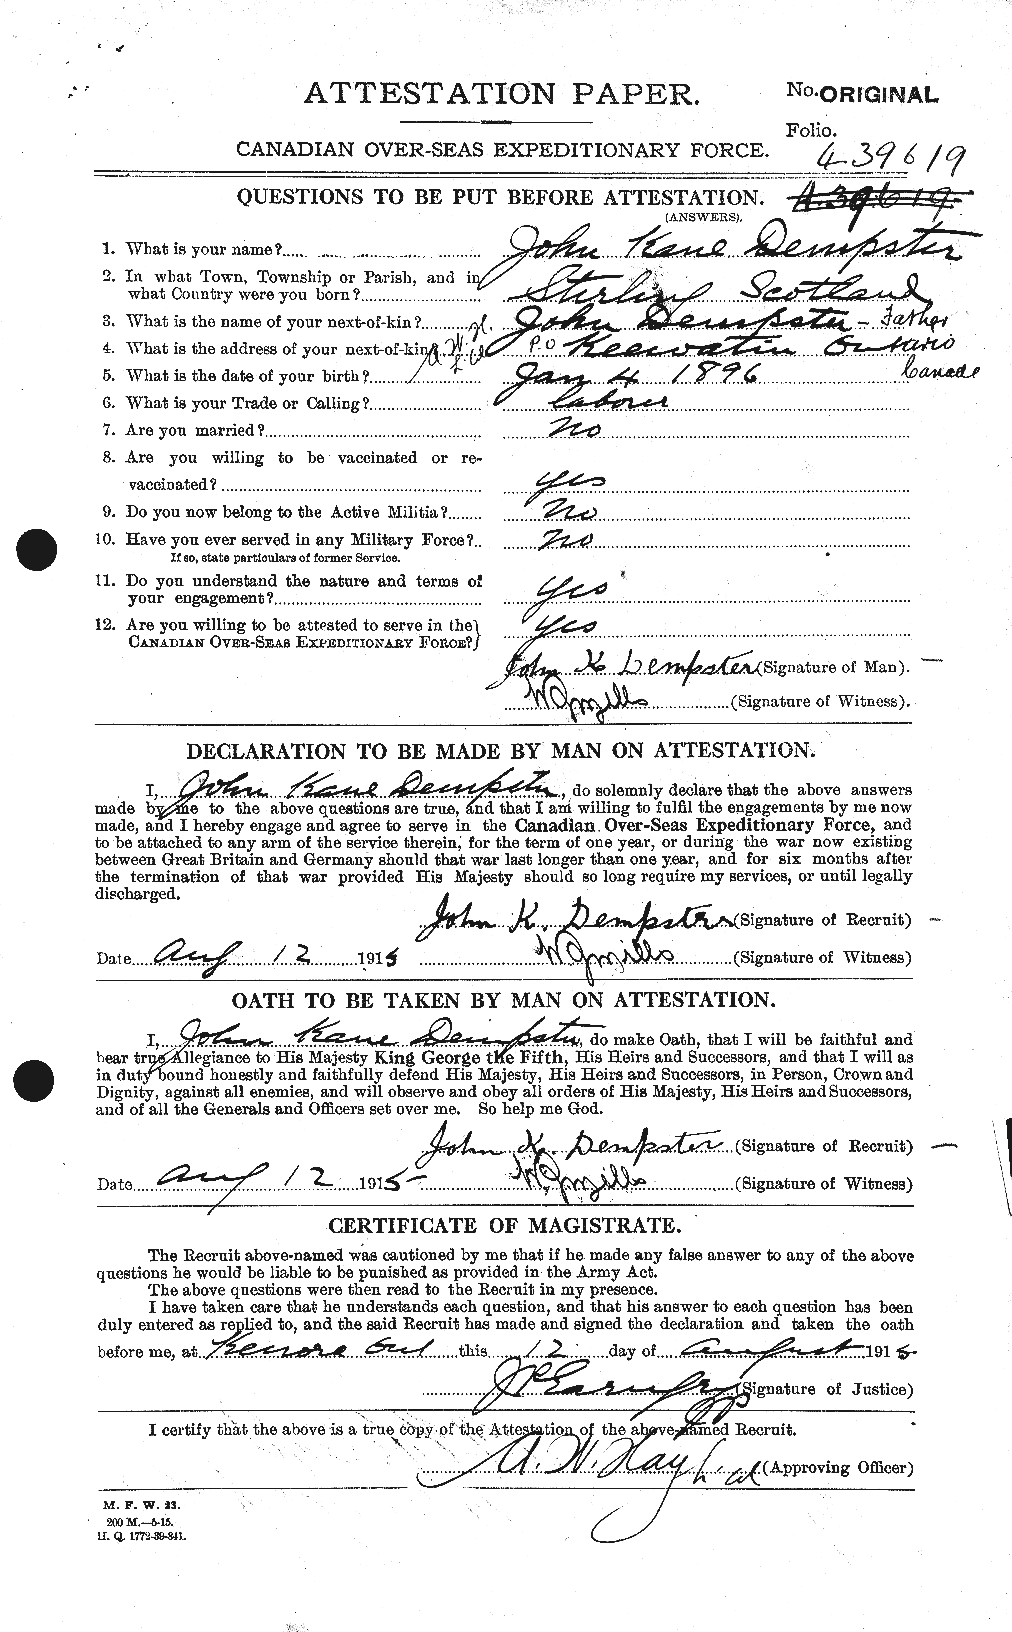 Personnel Records of the First World War - CEF 286968a